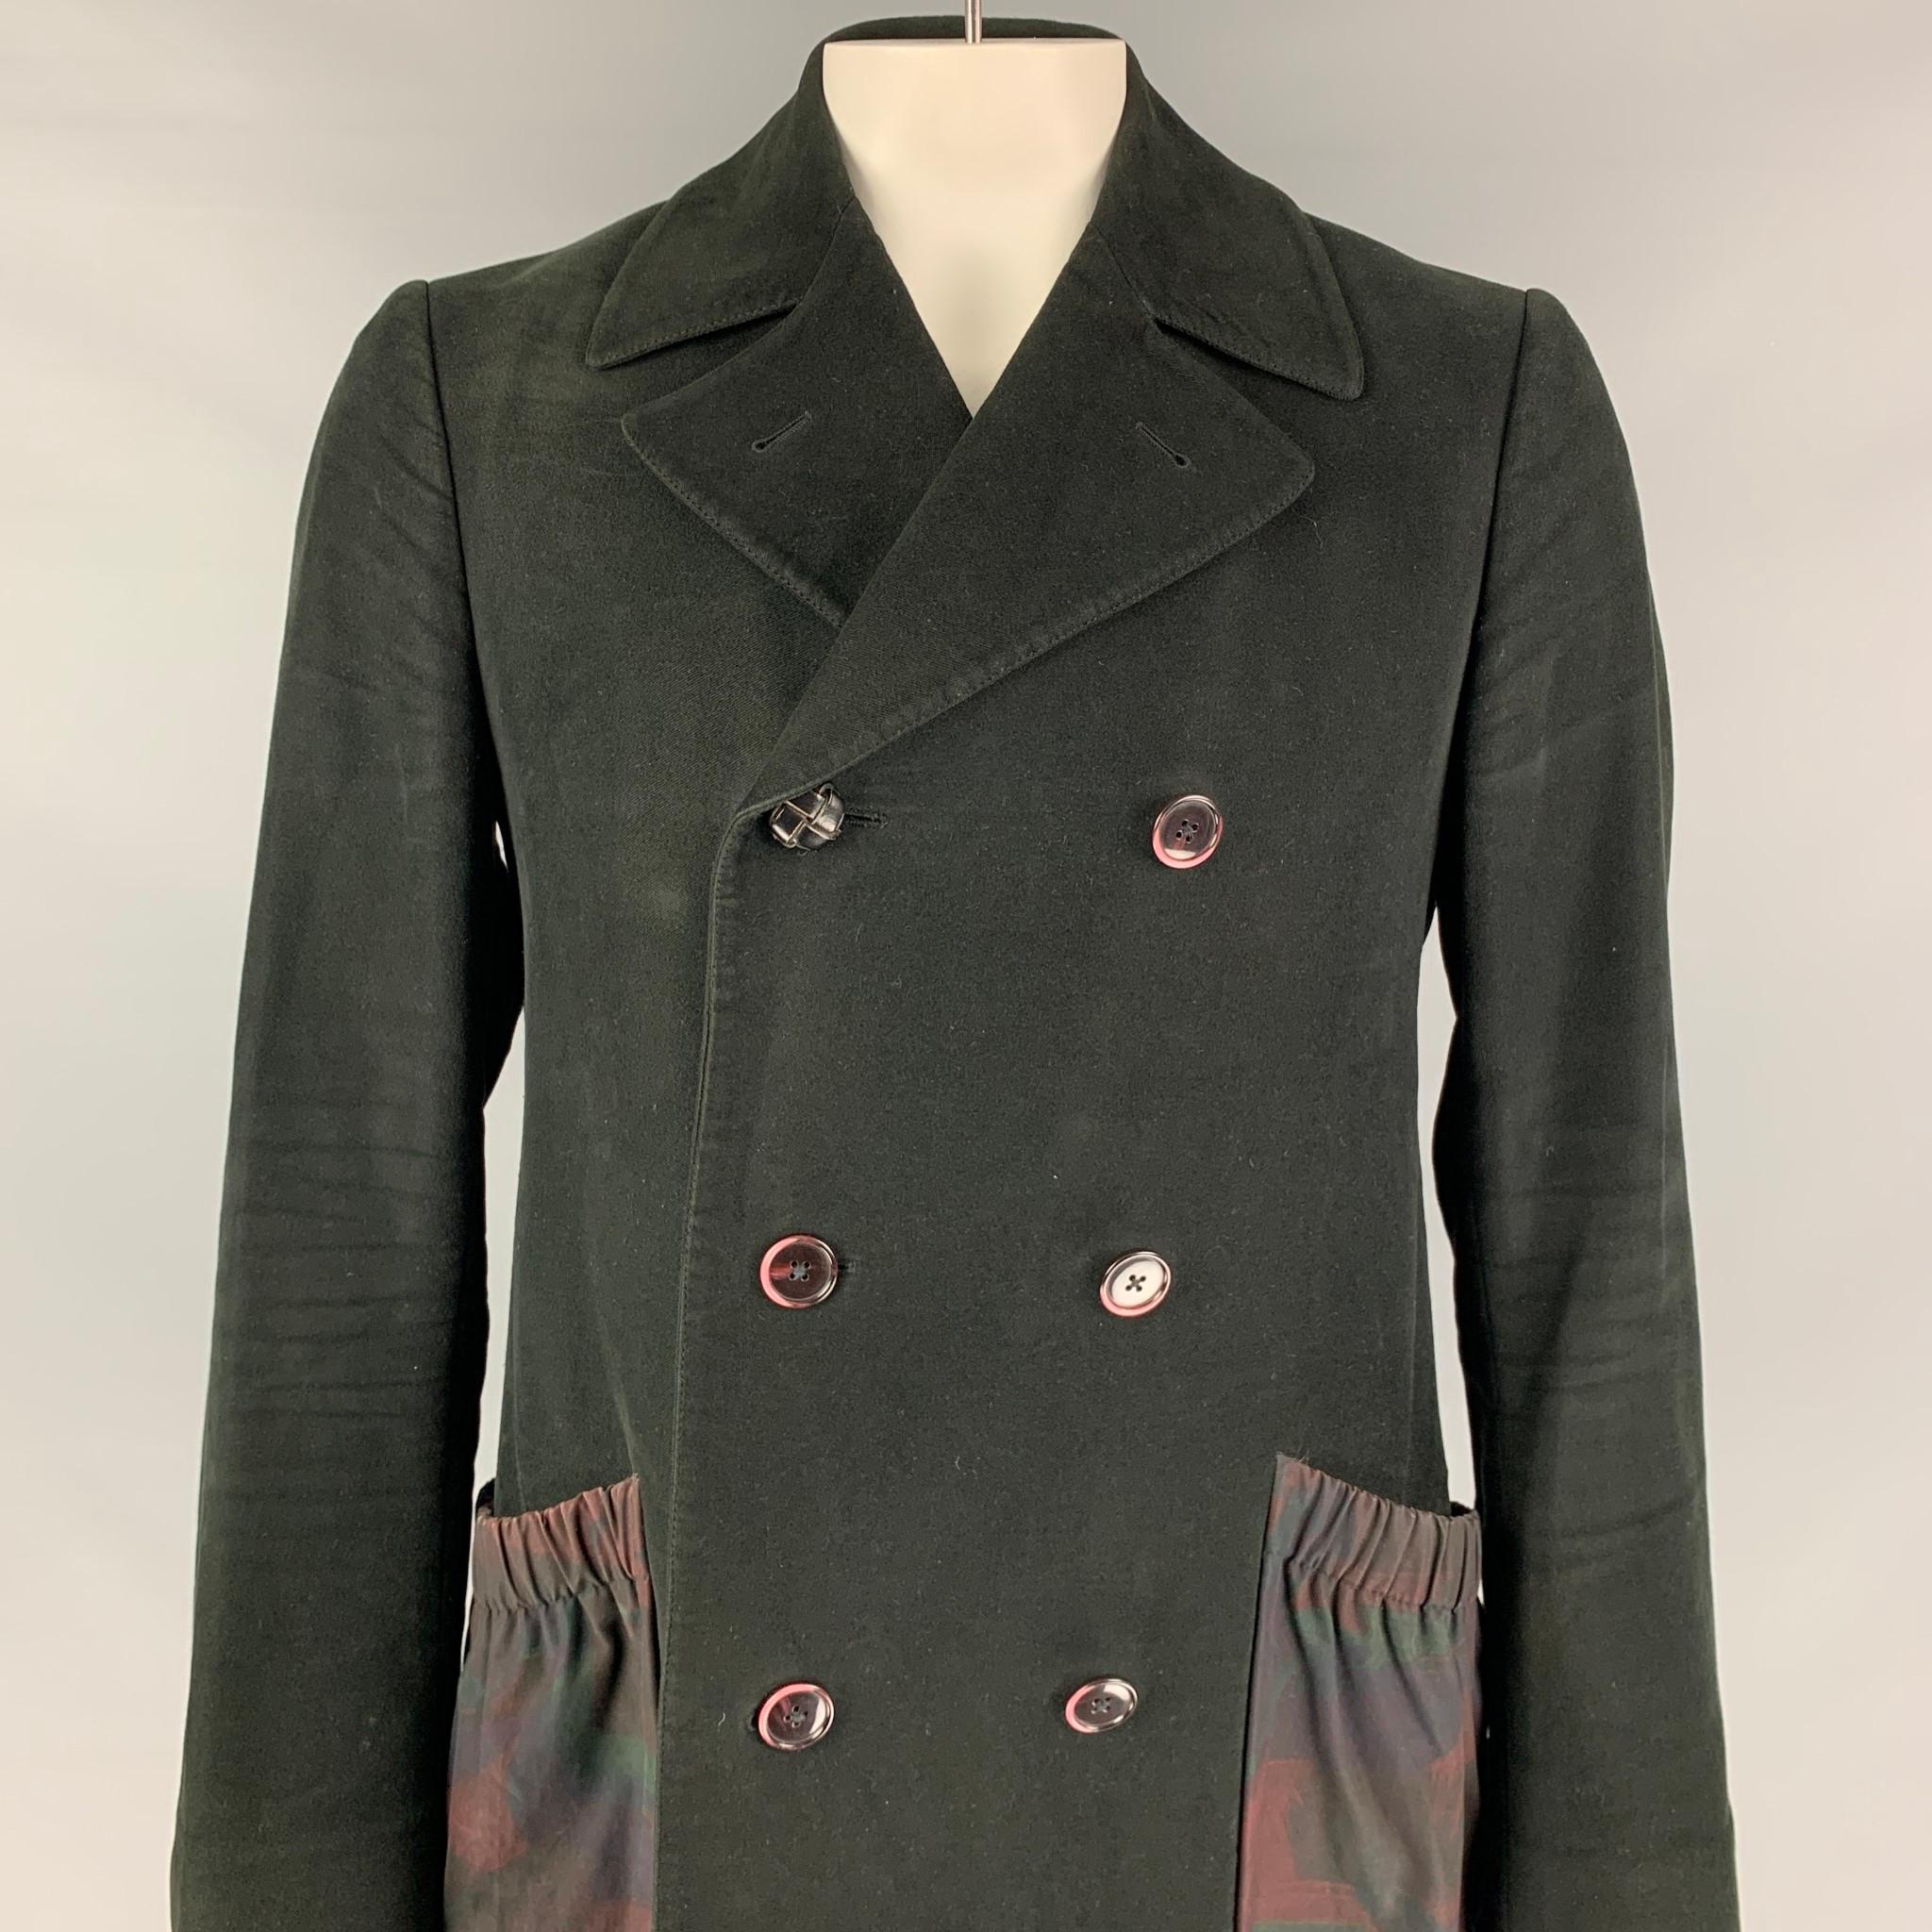 ETRO coat comes in a black textured material with a full liner featuring a notch lapel, elastic patch pockets, oversized fit, single back vent, and a double breasted closure. 

Very Good Pre-Owned Condition. Missing fabric tag.
Marked: